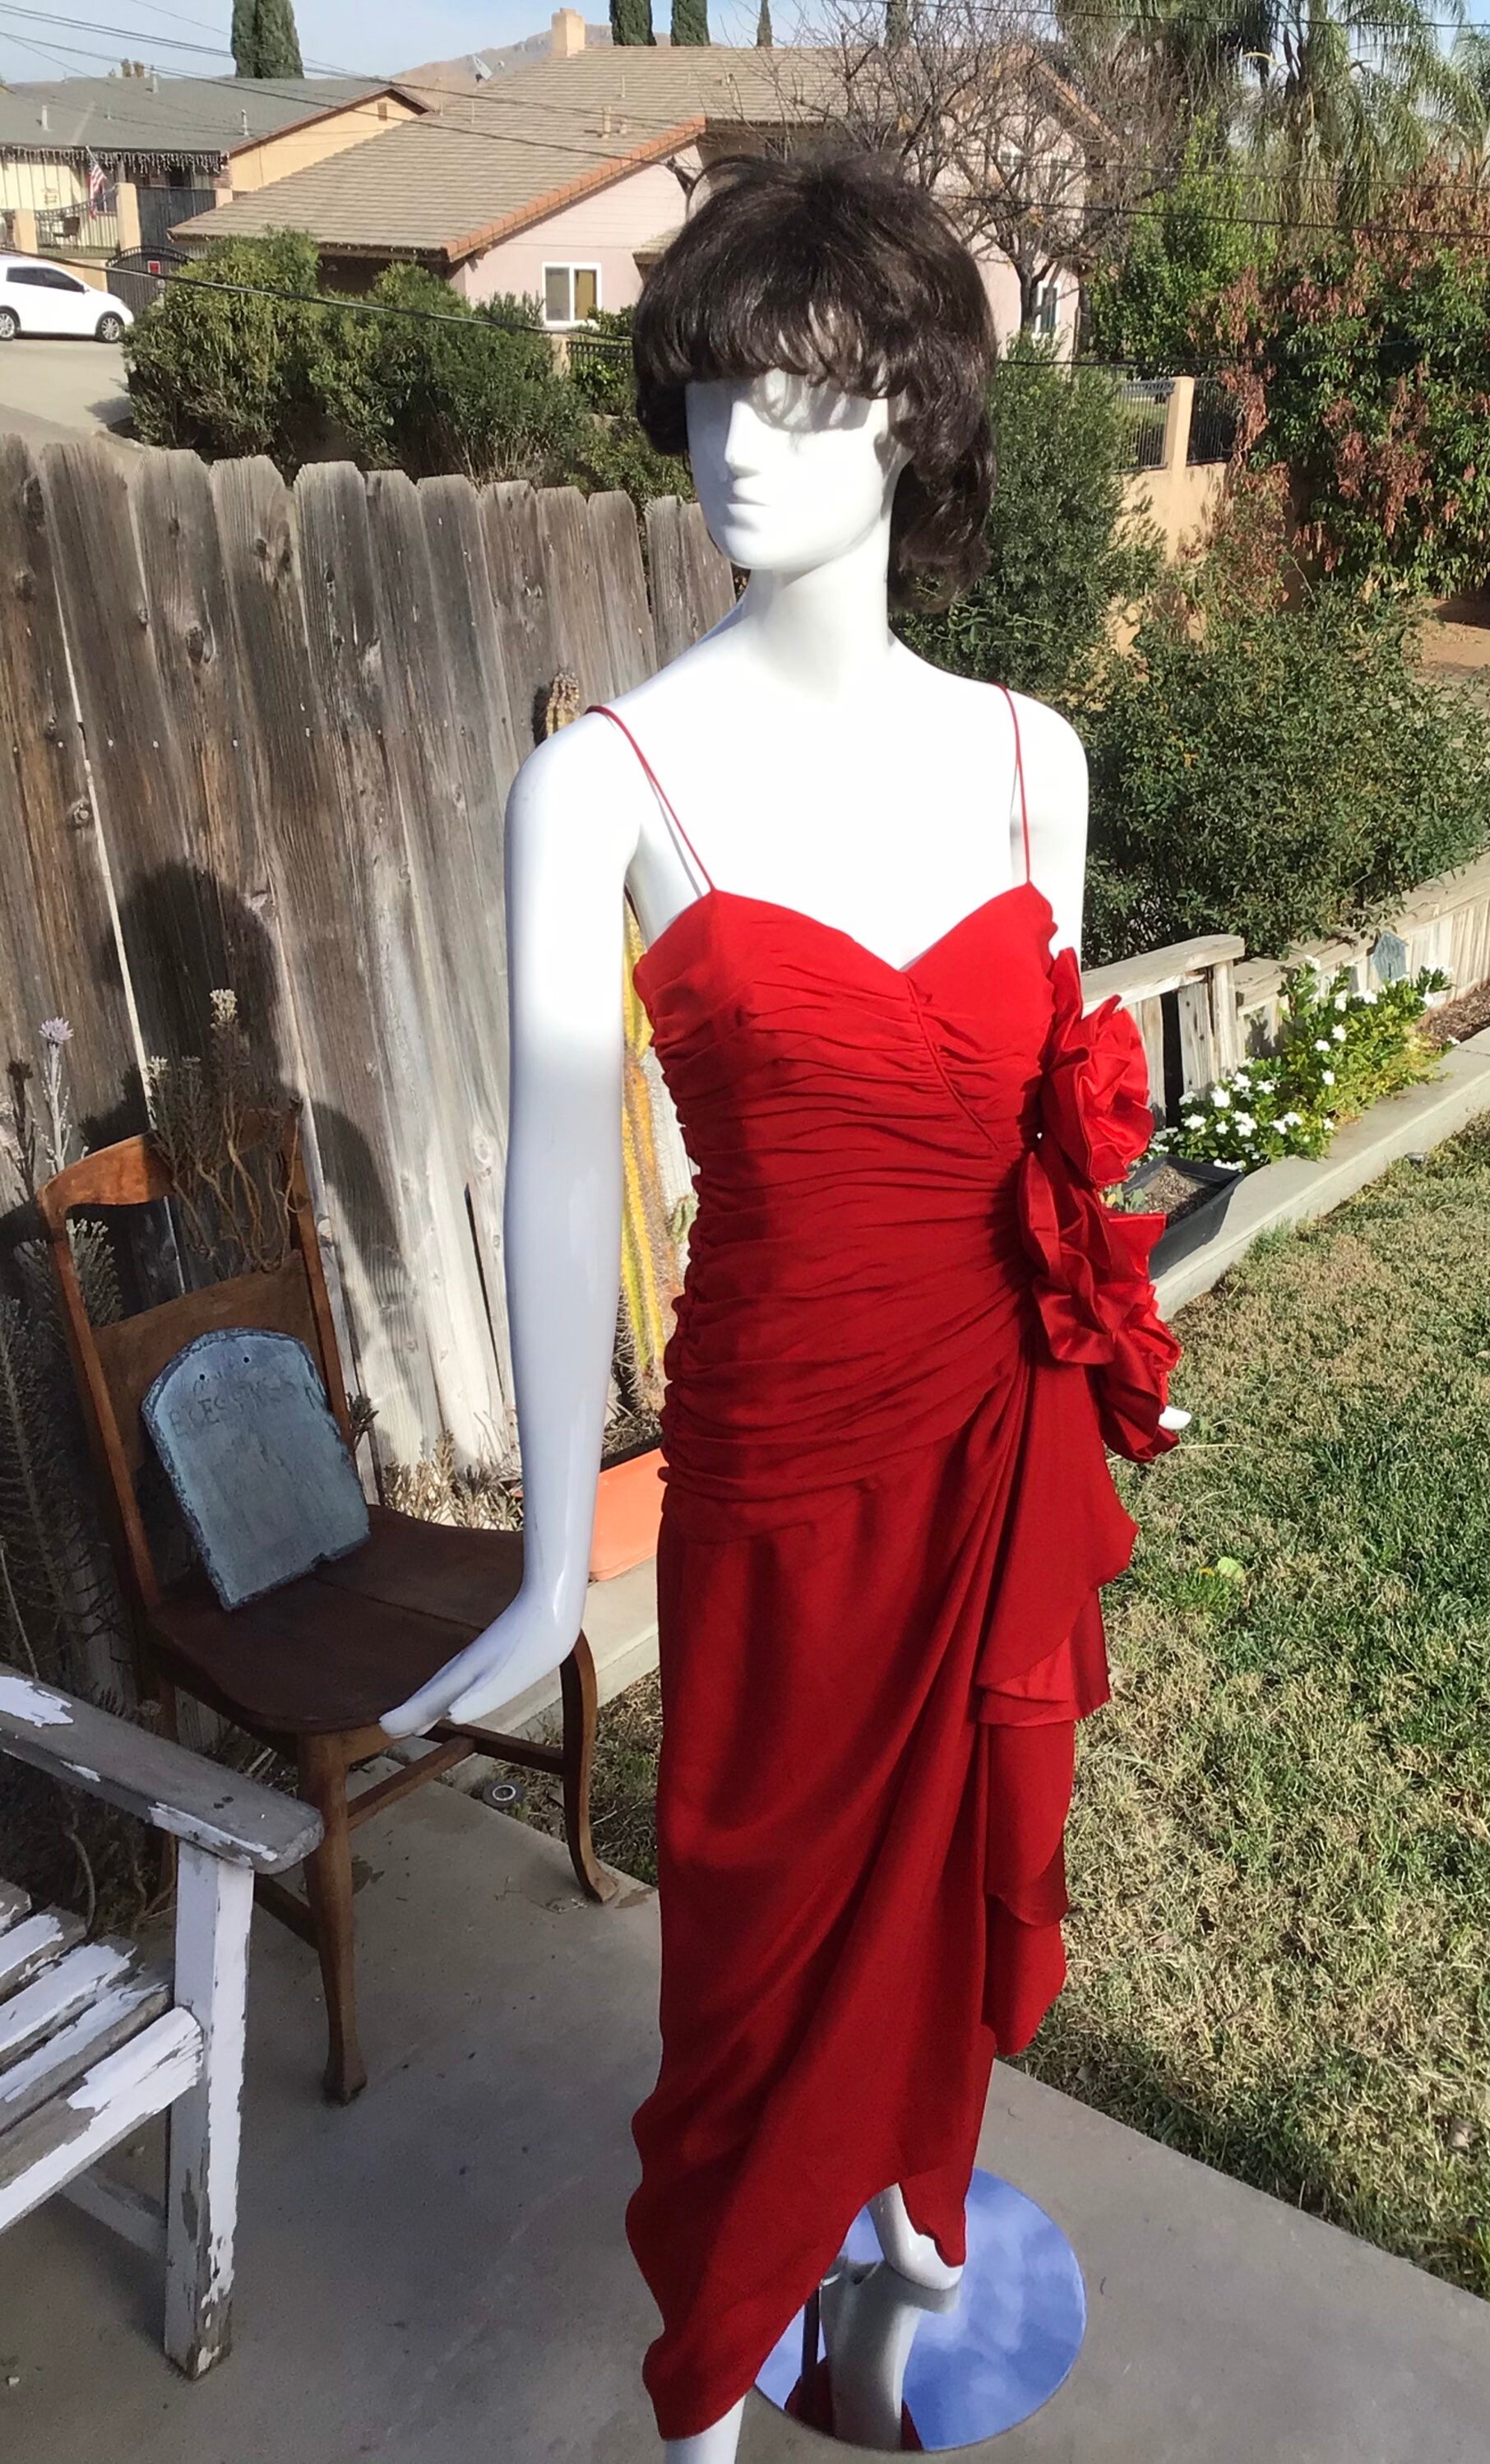 Vintage MIGNON Anne Marie Gabalis New York Red Faille Evening Gown with Shoulder Wrap Vintage Mignon Gabalis 80s Red Holiday Gown Size 2-4